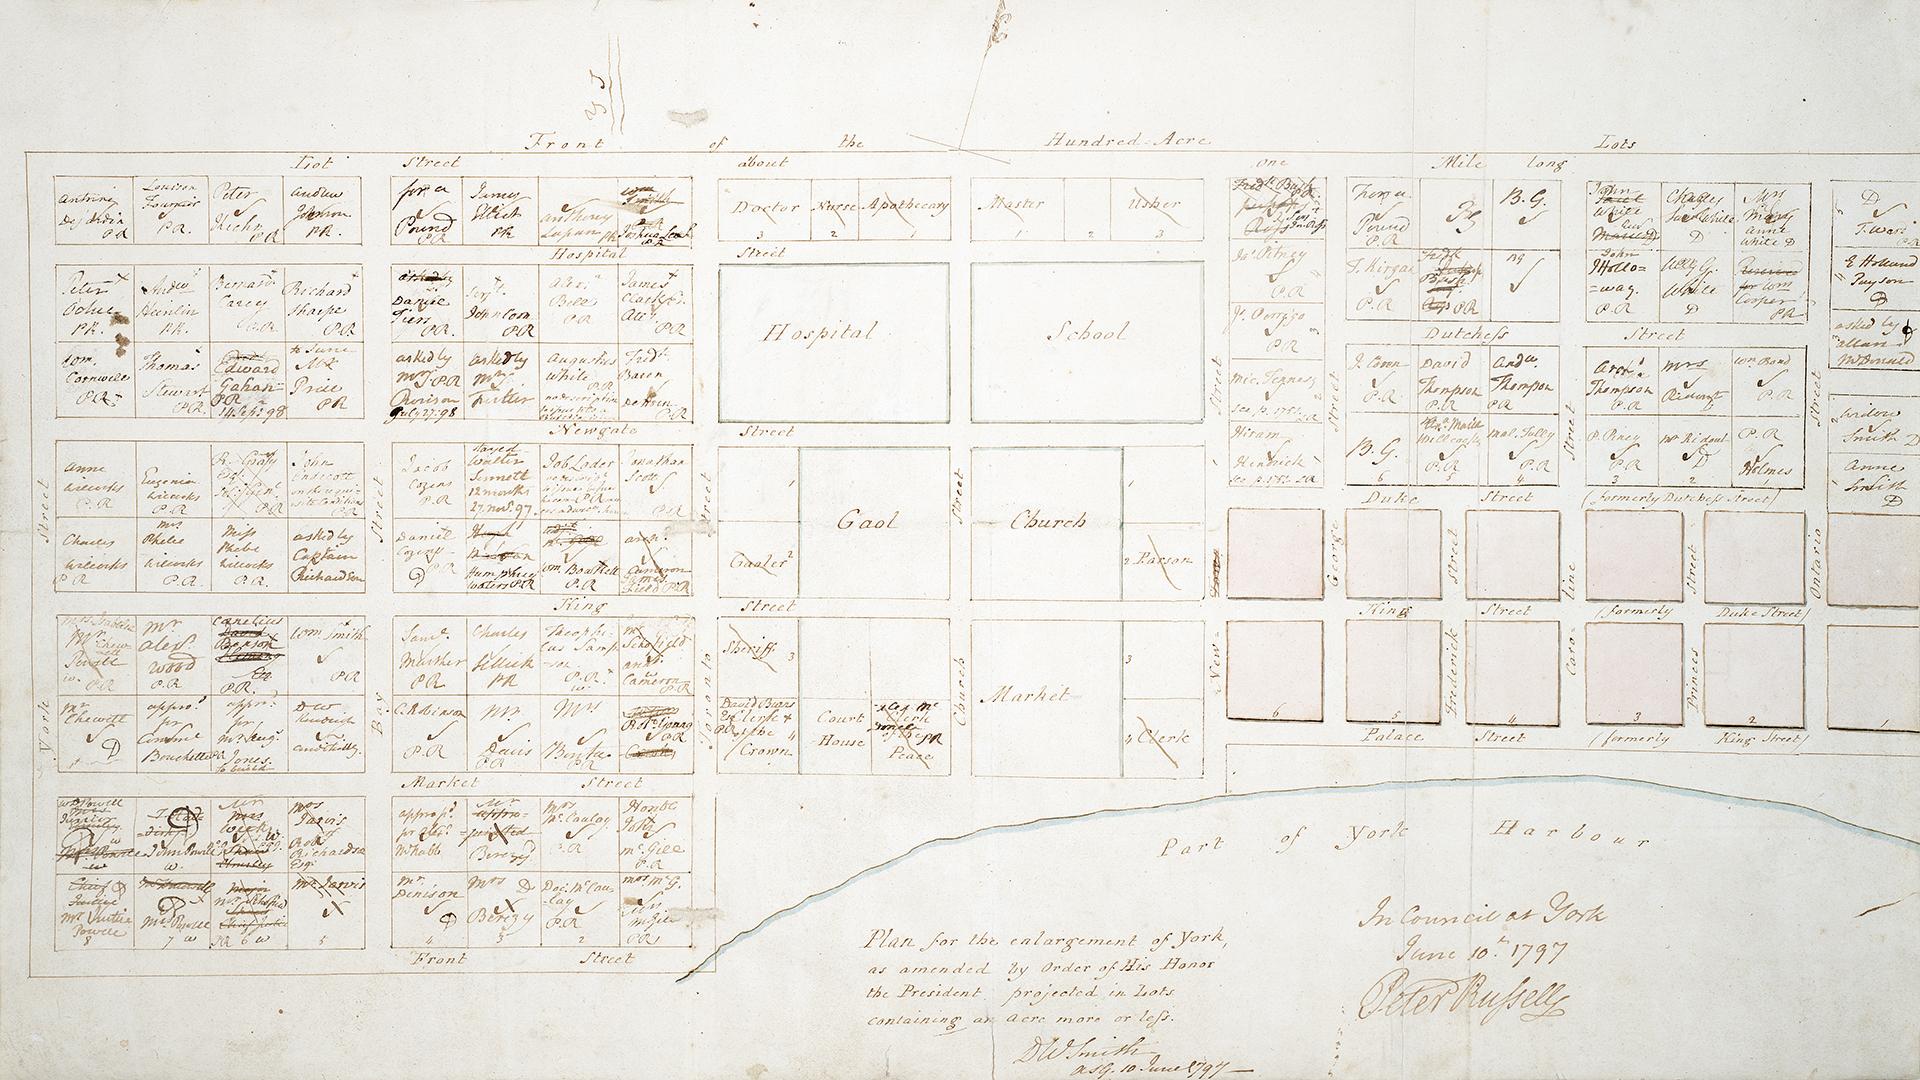 Plan for the enlargement of York, as amended by Order of His Honor the President projected in lots containing an acre more or less.